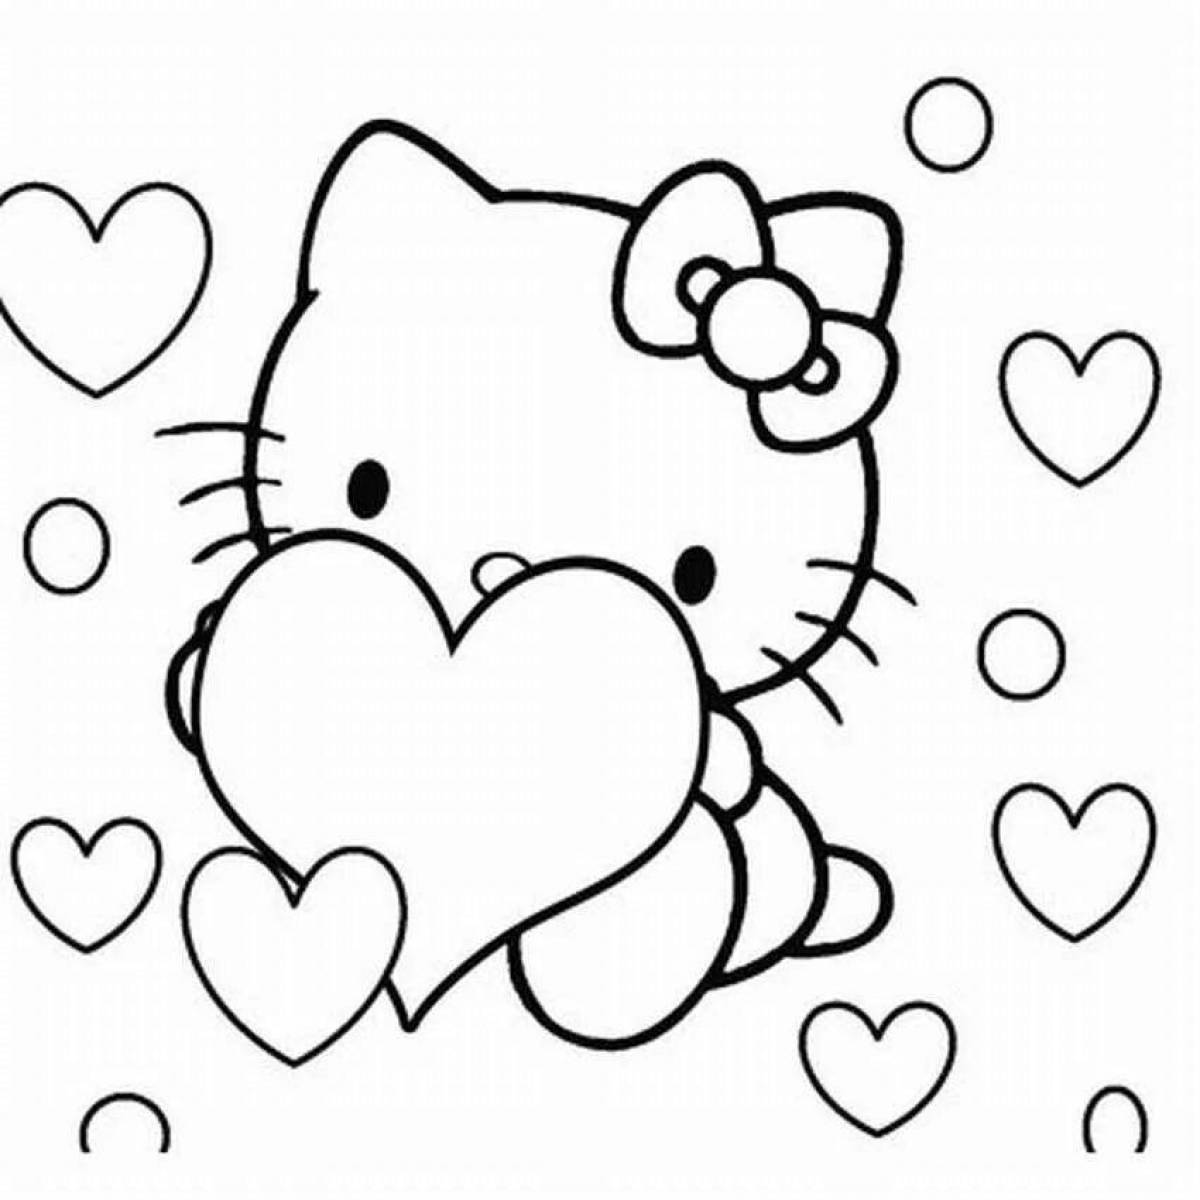 Coloring book calm cat with a heart